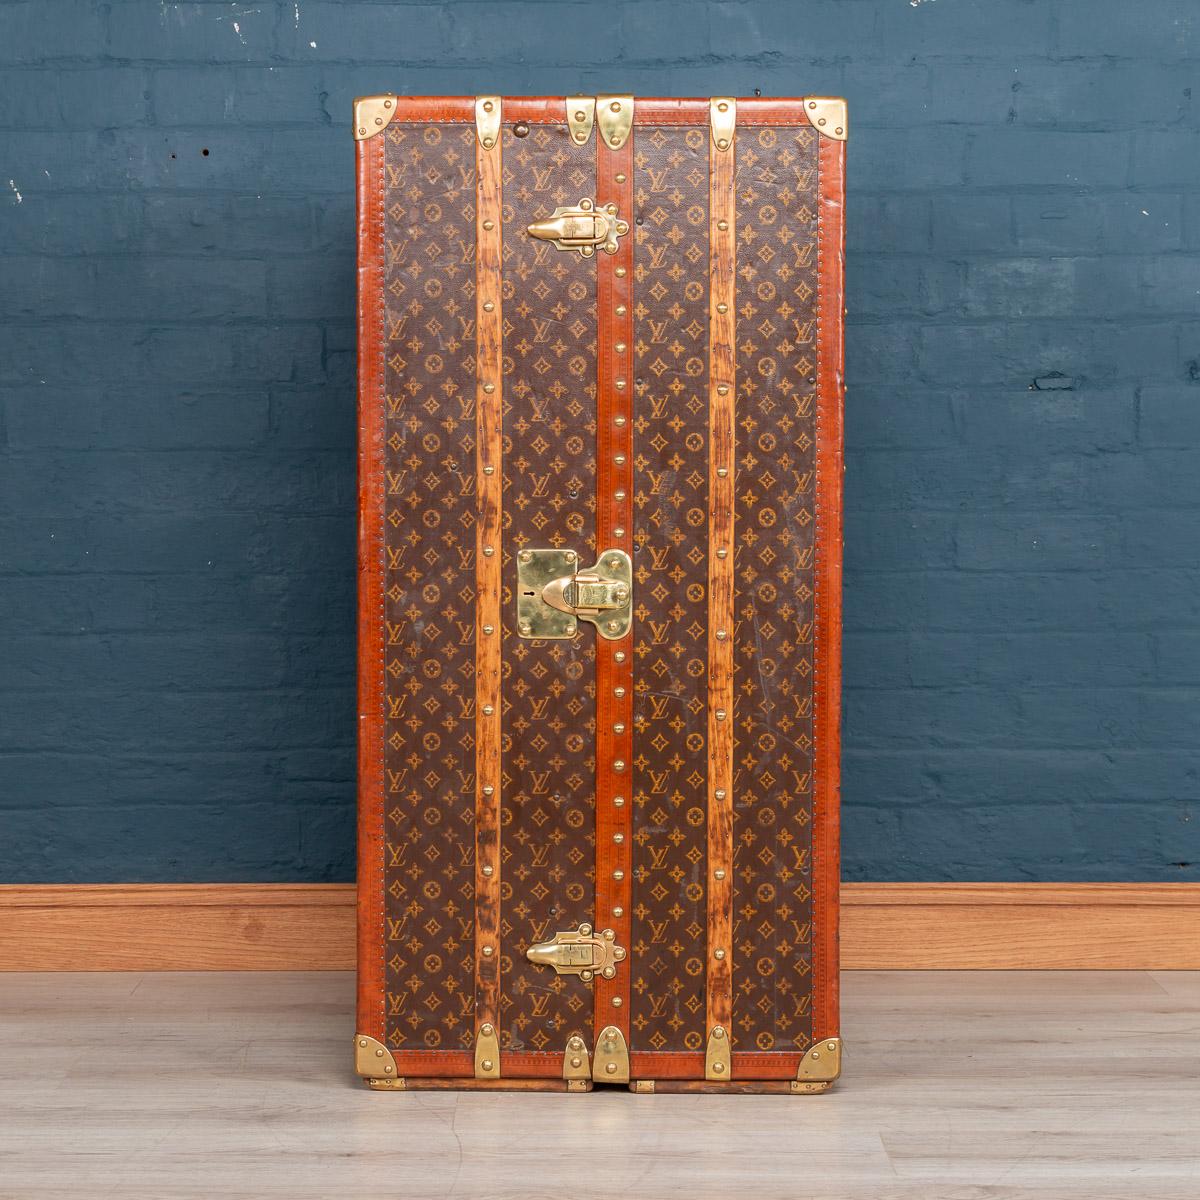 Antique 20th century Louis Vuitton trunk, with customised interior revealing a cocktail bar and humidor for 300+ cigars. The customisation has been carried out by the finest Italian craftsmen to the highest standard, with first grade microfibre